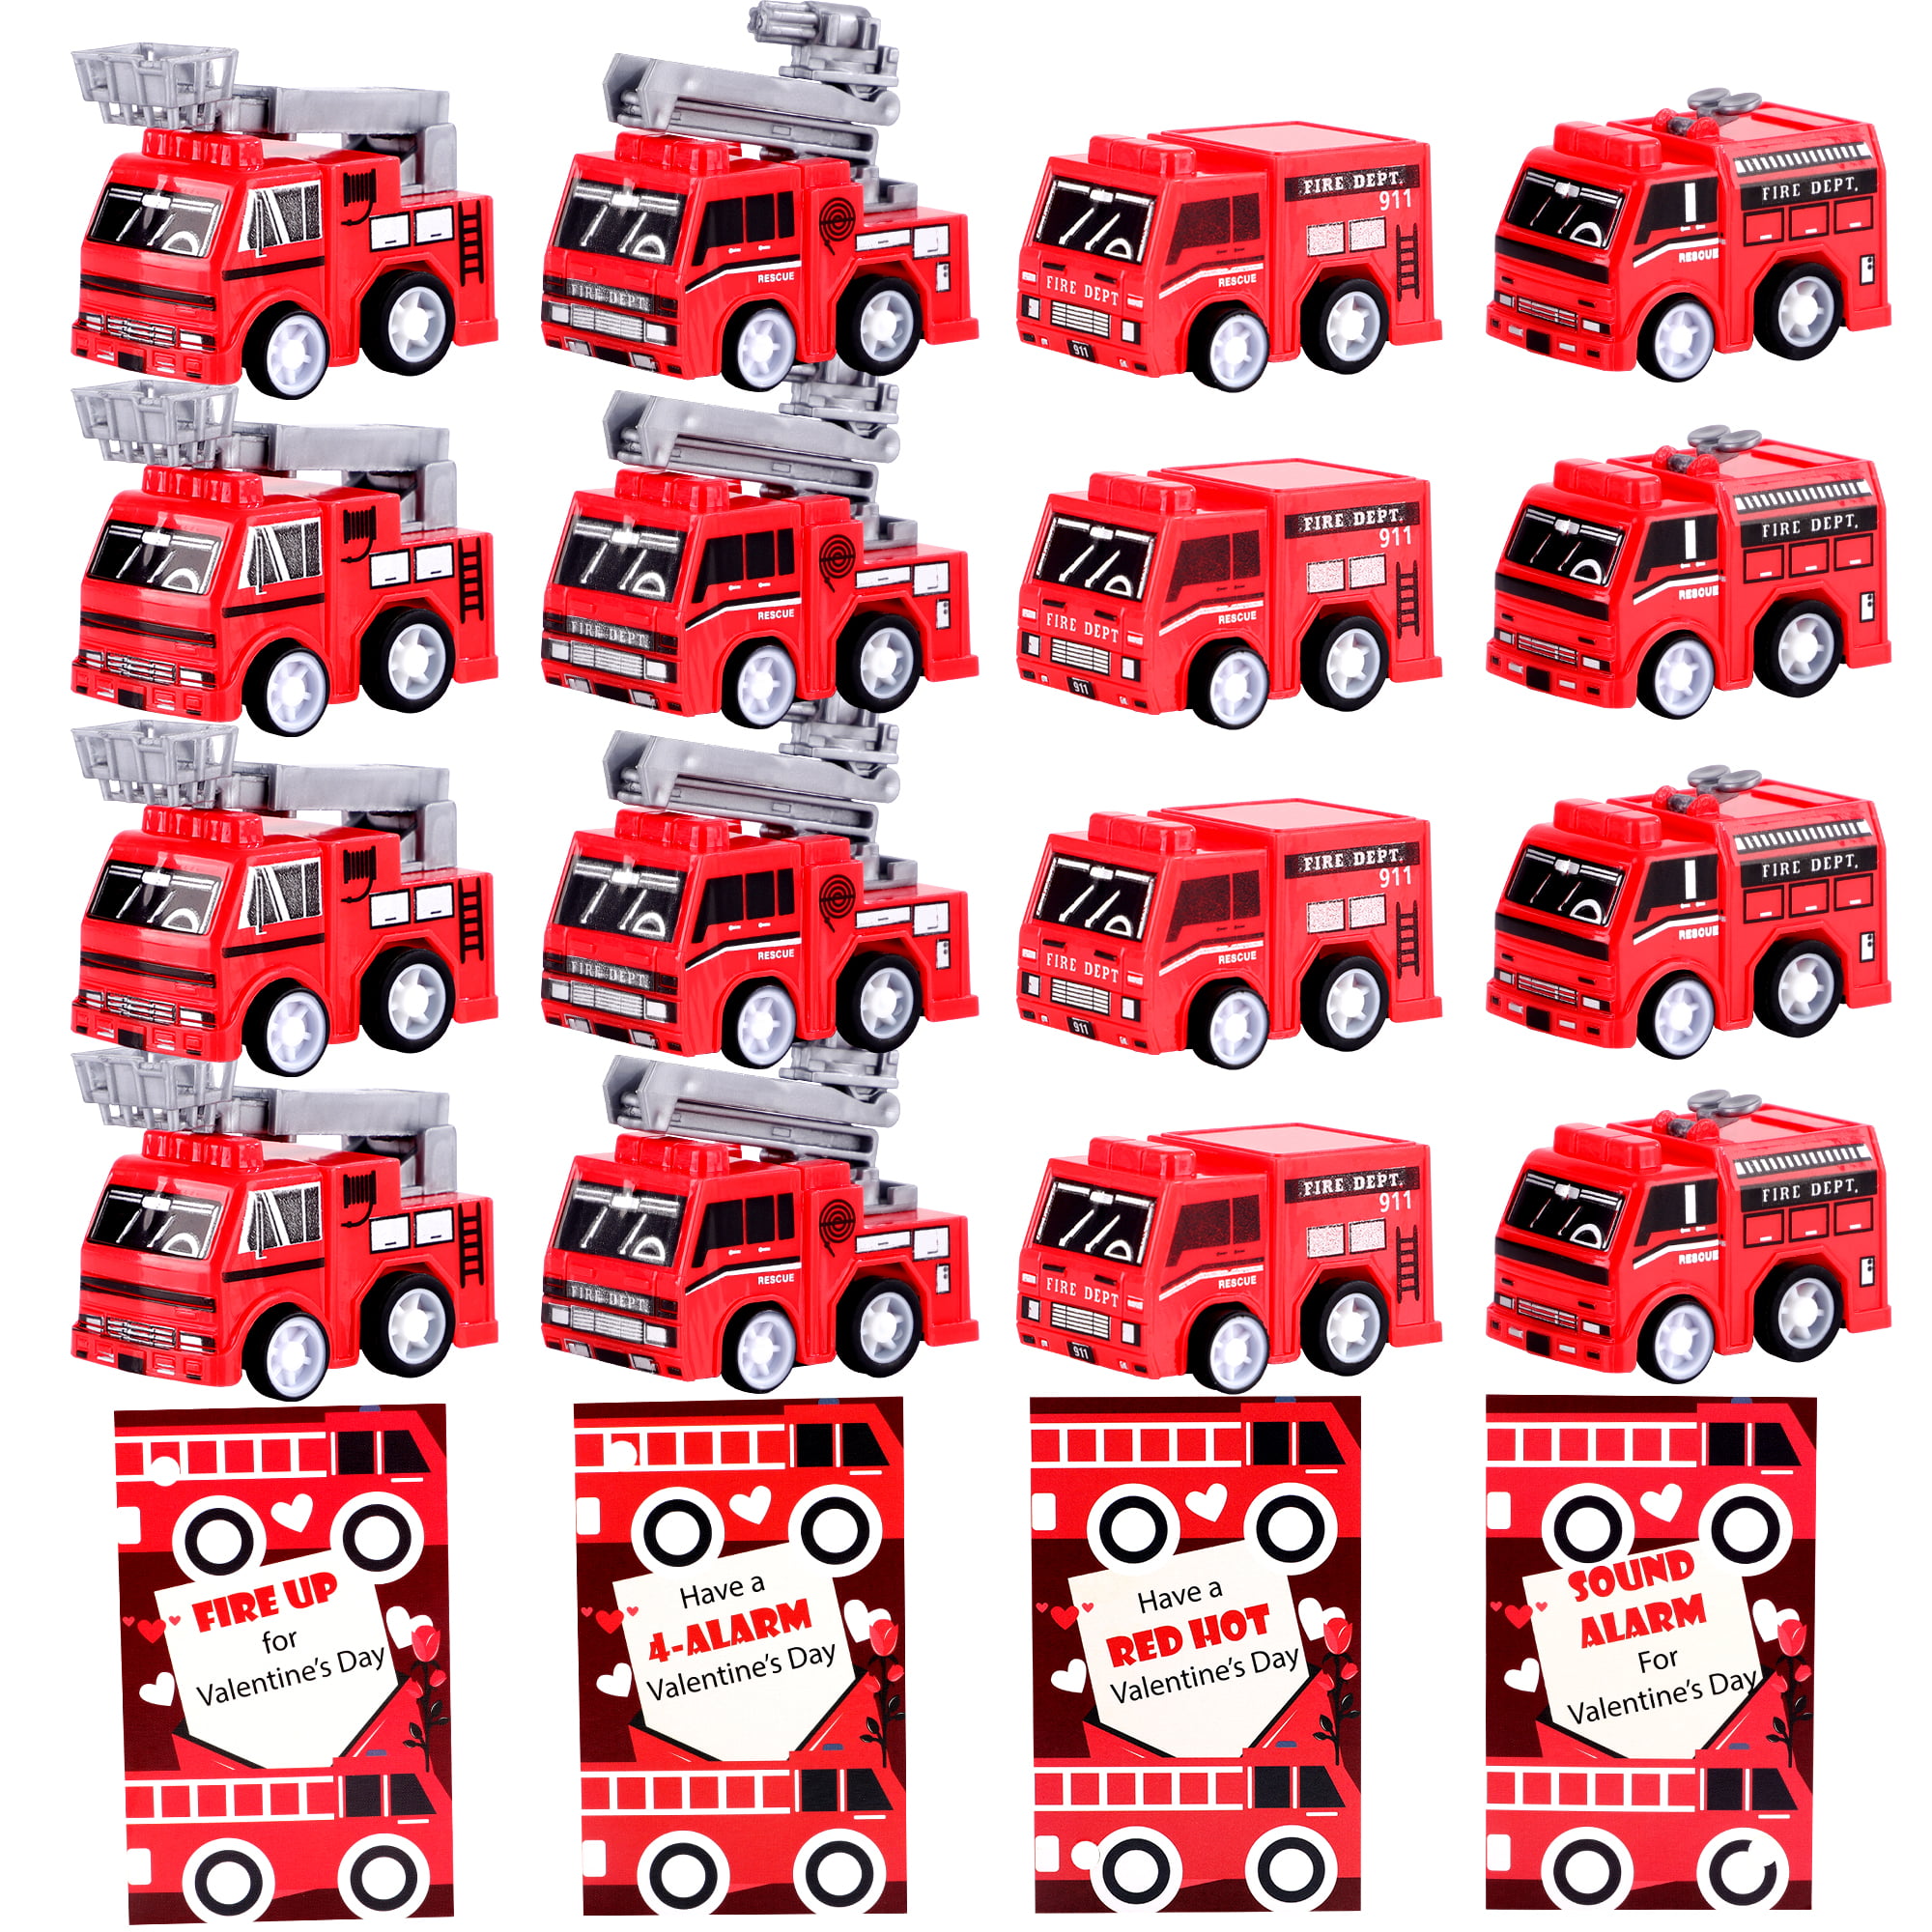 FiGoal 16 PCS Valentine’s Day Kids Gift Set with 16 Pull Back Fire Trucks and 30 Valentines Gift Cards For Kids Classroom Prize Valentines Gift Exchange Goodie Bags 